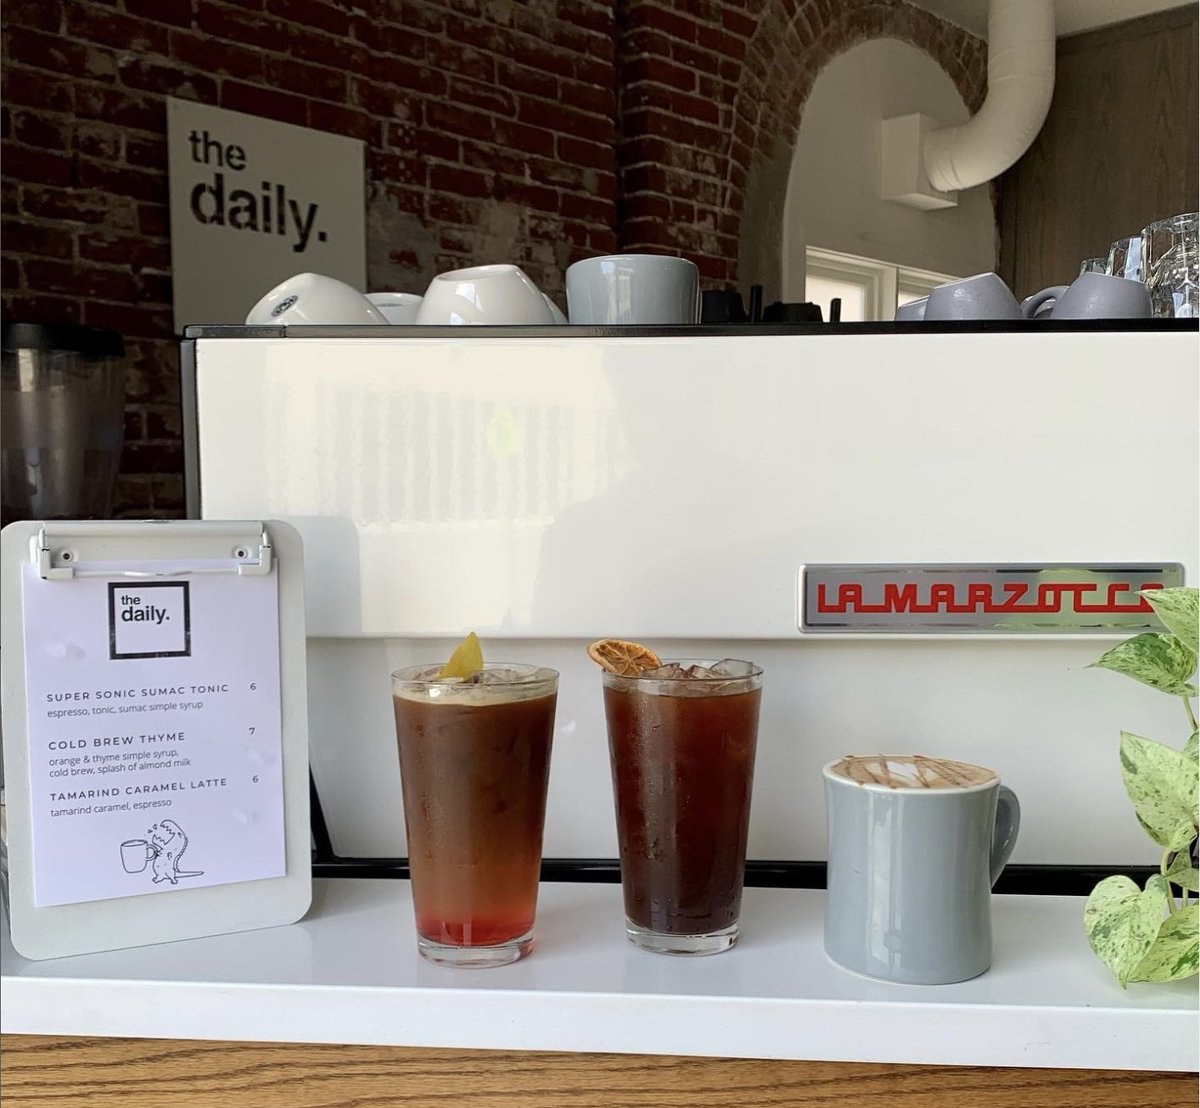 Happy International Coffee Day! ☕️ Look no further for an excuse to indulge in your favorite morning brew at a local #NorthBroad coffee shop. We love drinks at the daily in the Divine Lorraine! Say hi and that the NBR sent you 🧡 #ThinkBroad #CoffeeDay #CoffeeTime #CoffeeLover